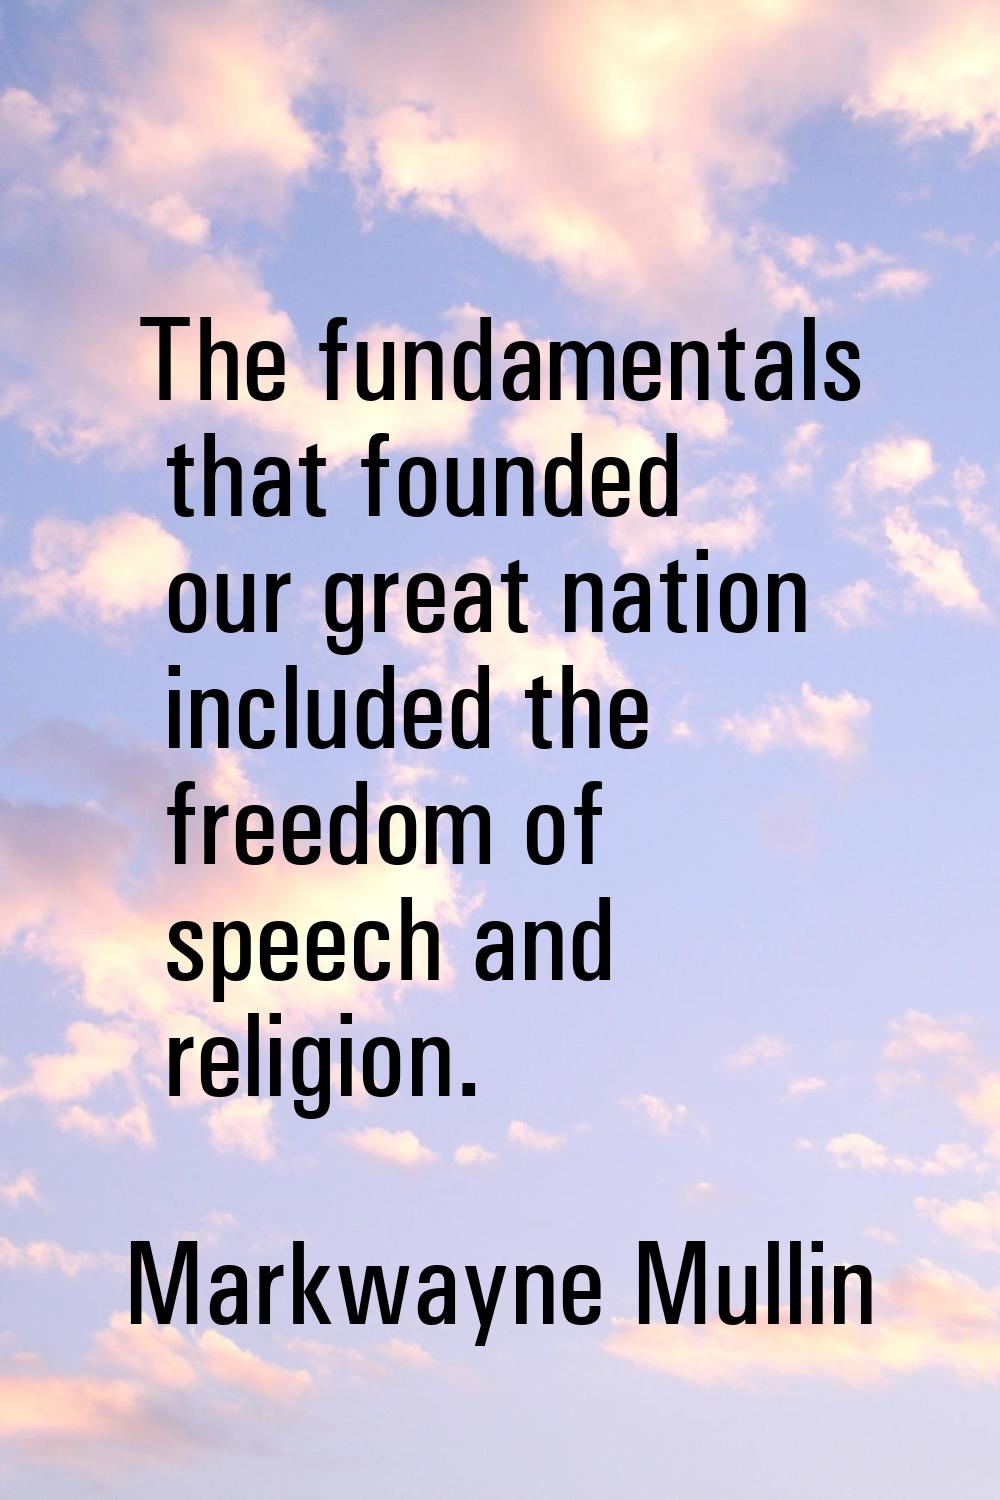 The fundamentals that founded our great nation included the freedom of speech and religion.